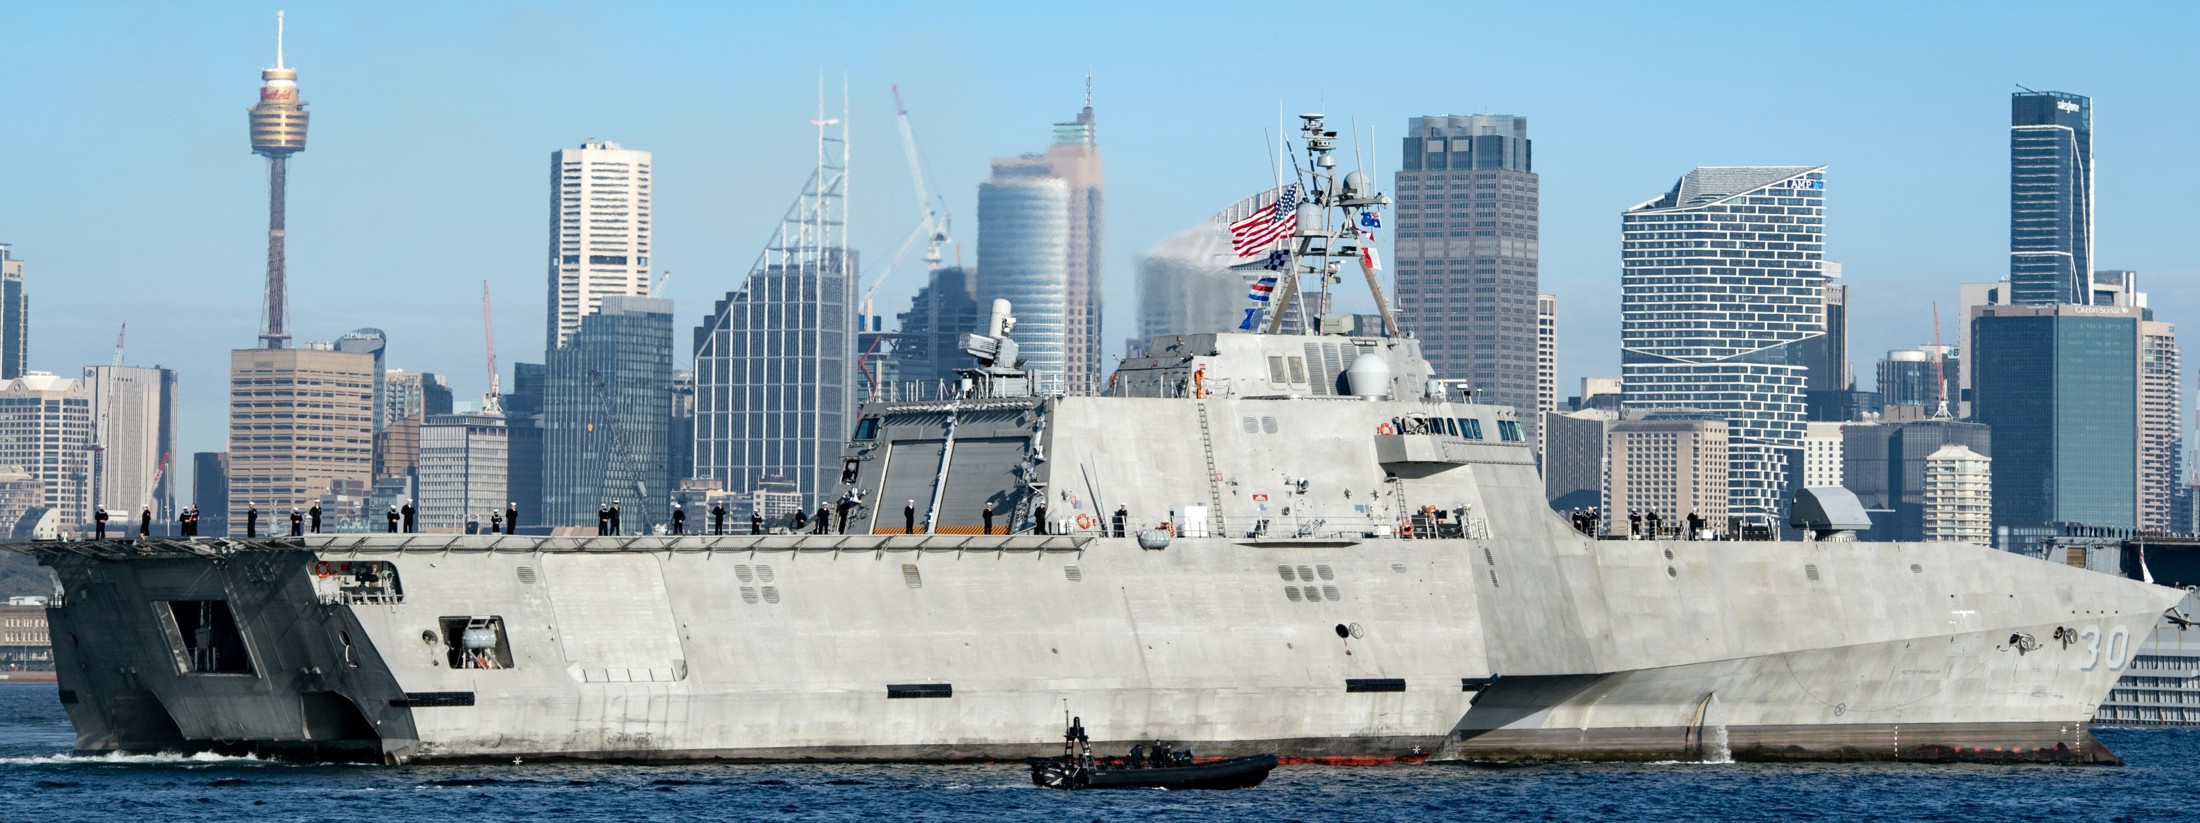 lcs-30 uss canberra littoral combat ship independence class us navy arriving sydney australia 30